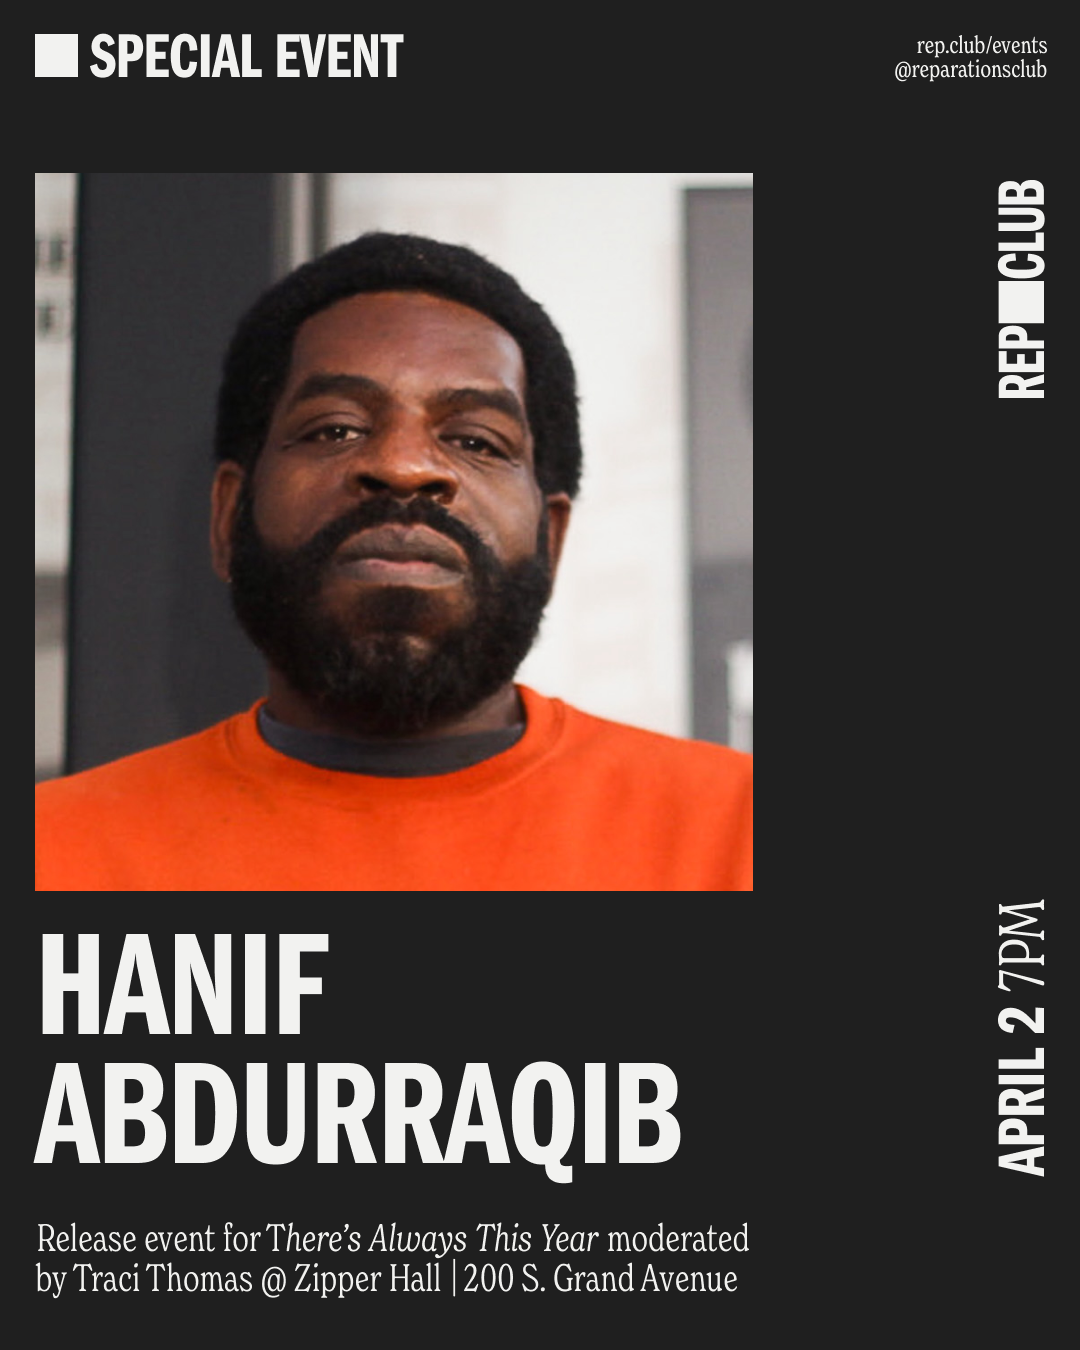 Apr 2nd EVENT: There's Always This Year // Hanif Abdurraqib & Traci Thomas